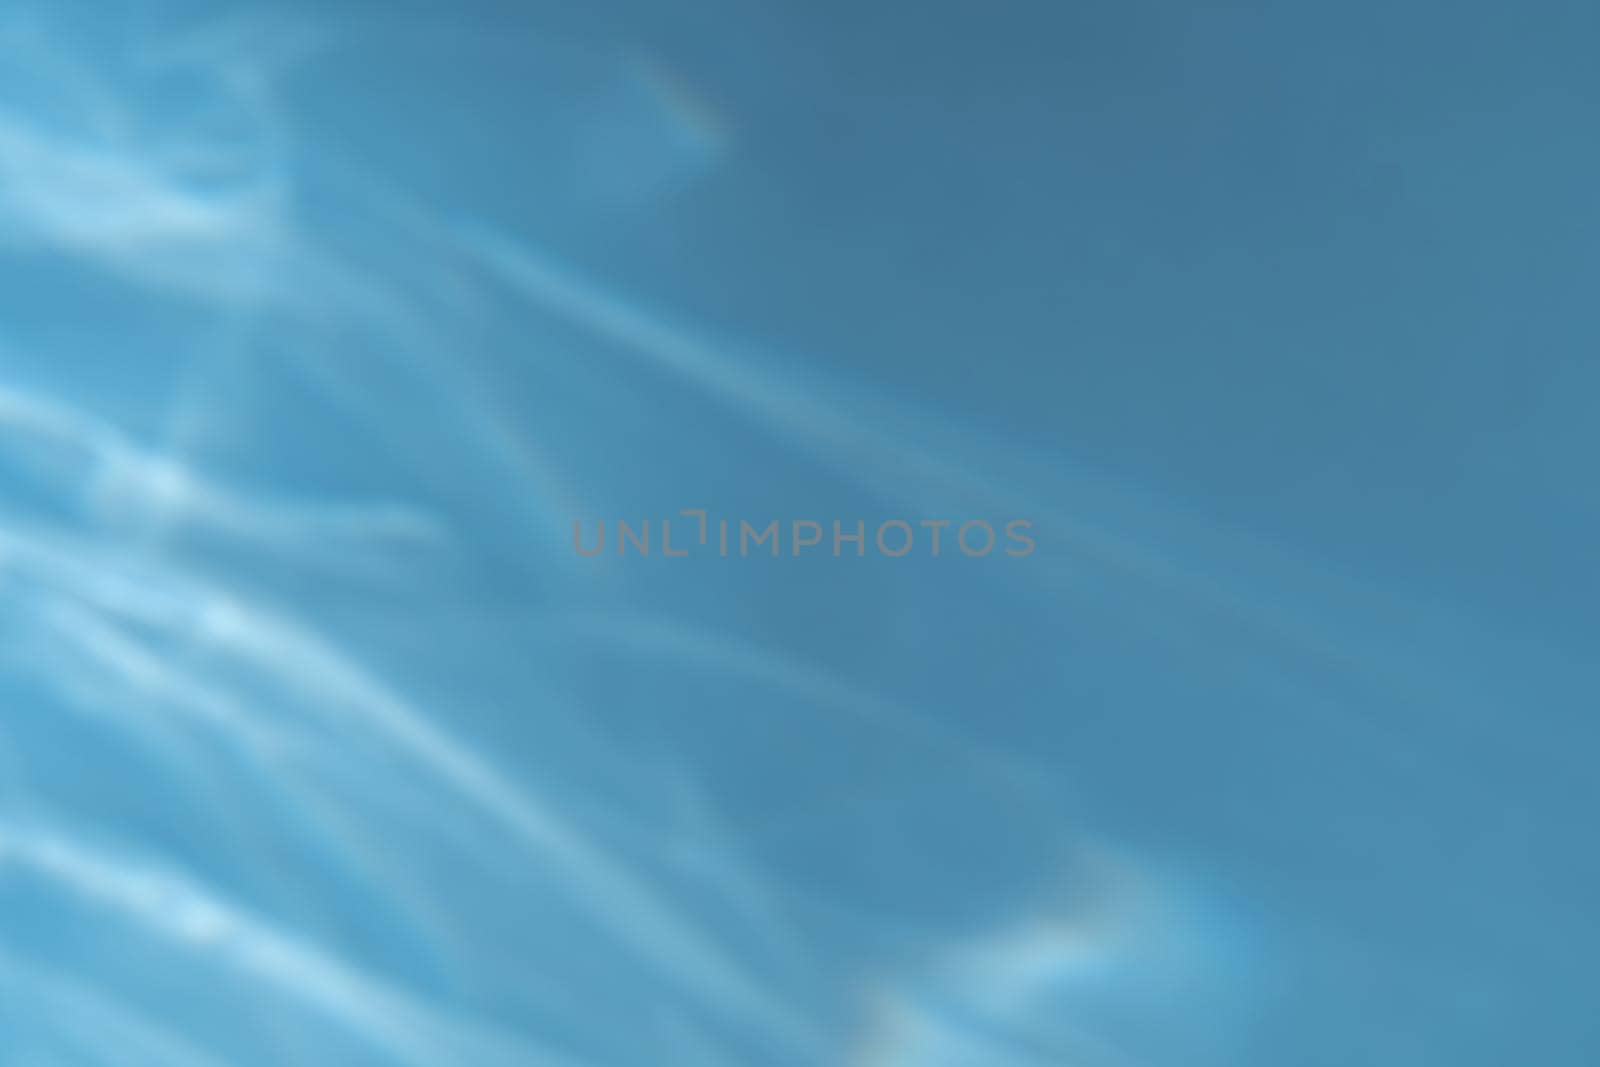 Caustic effect light refraction on blue wall overlay photo mockup, blurred sun rays refracting through glass prism with shadow. Abstract natural light refraction silhouette on water surface by photolime